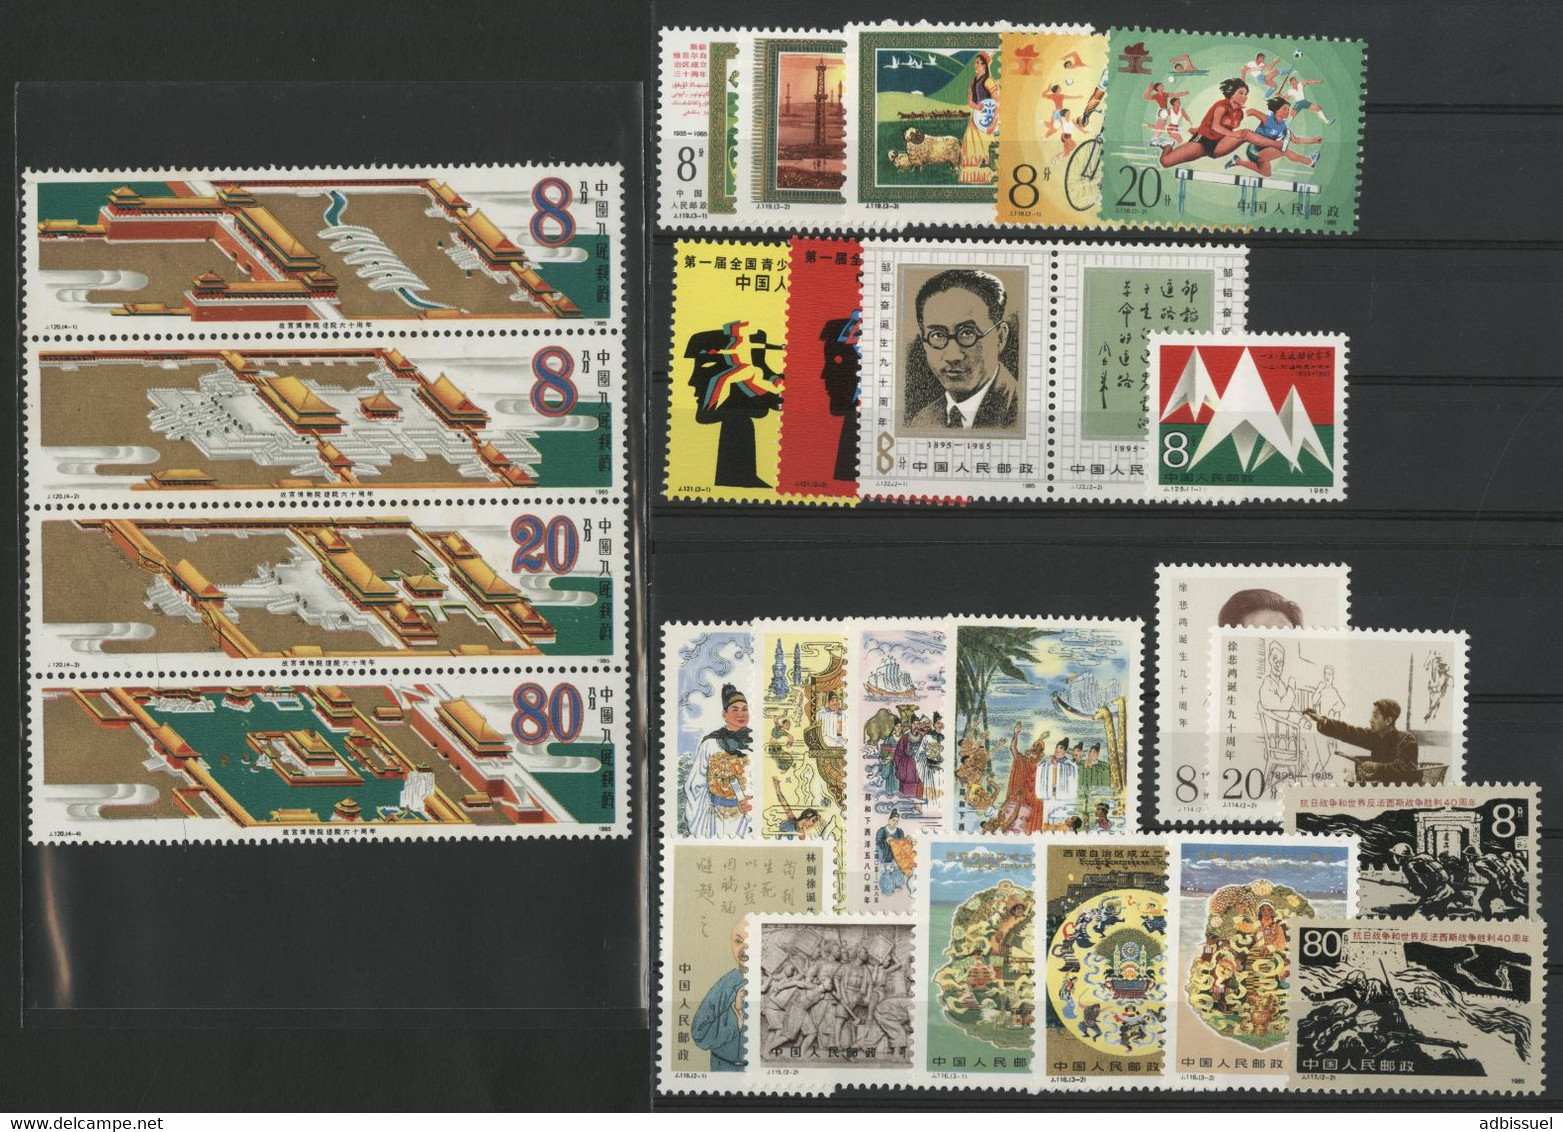 CHINA / CHINE 1985 Value 21 €. 28 Commemoratives Stamps MNH ** N° 2732 To 2758. VG/TB. - Ongebruikt